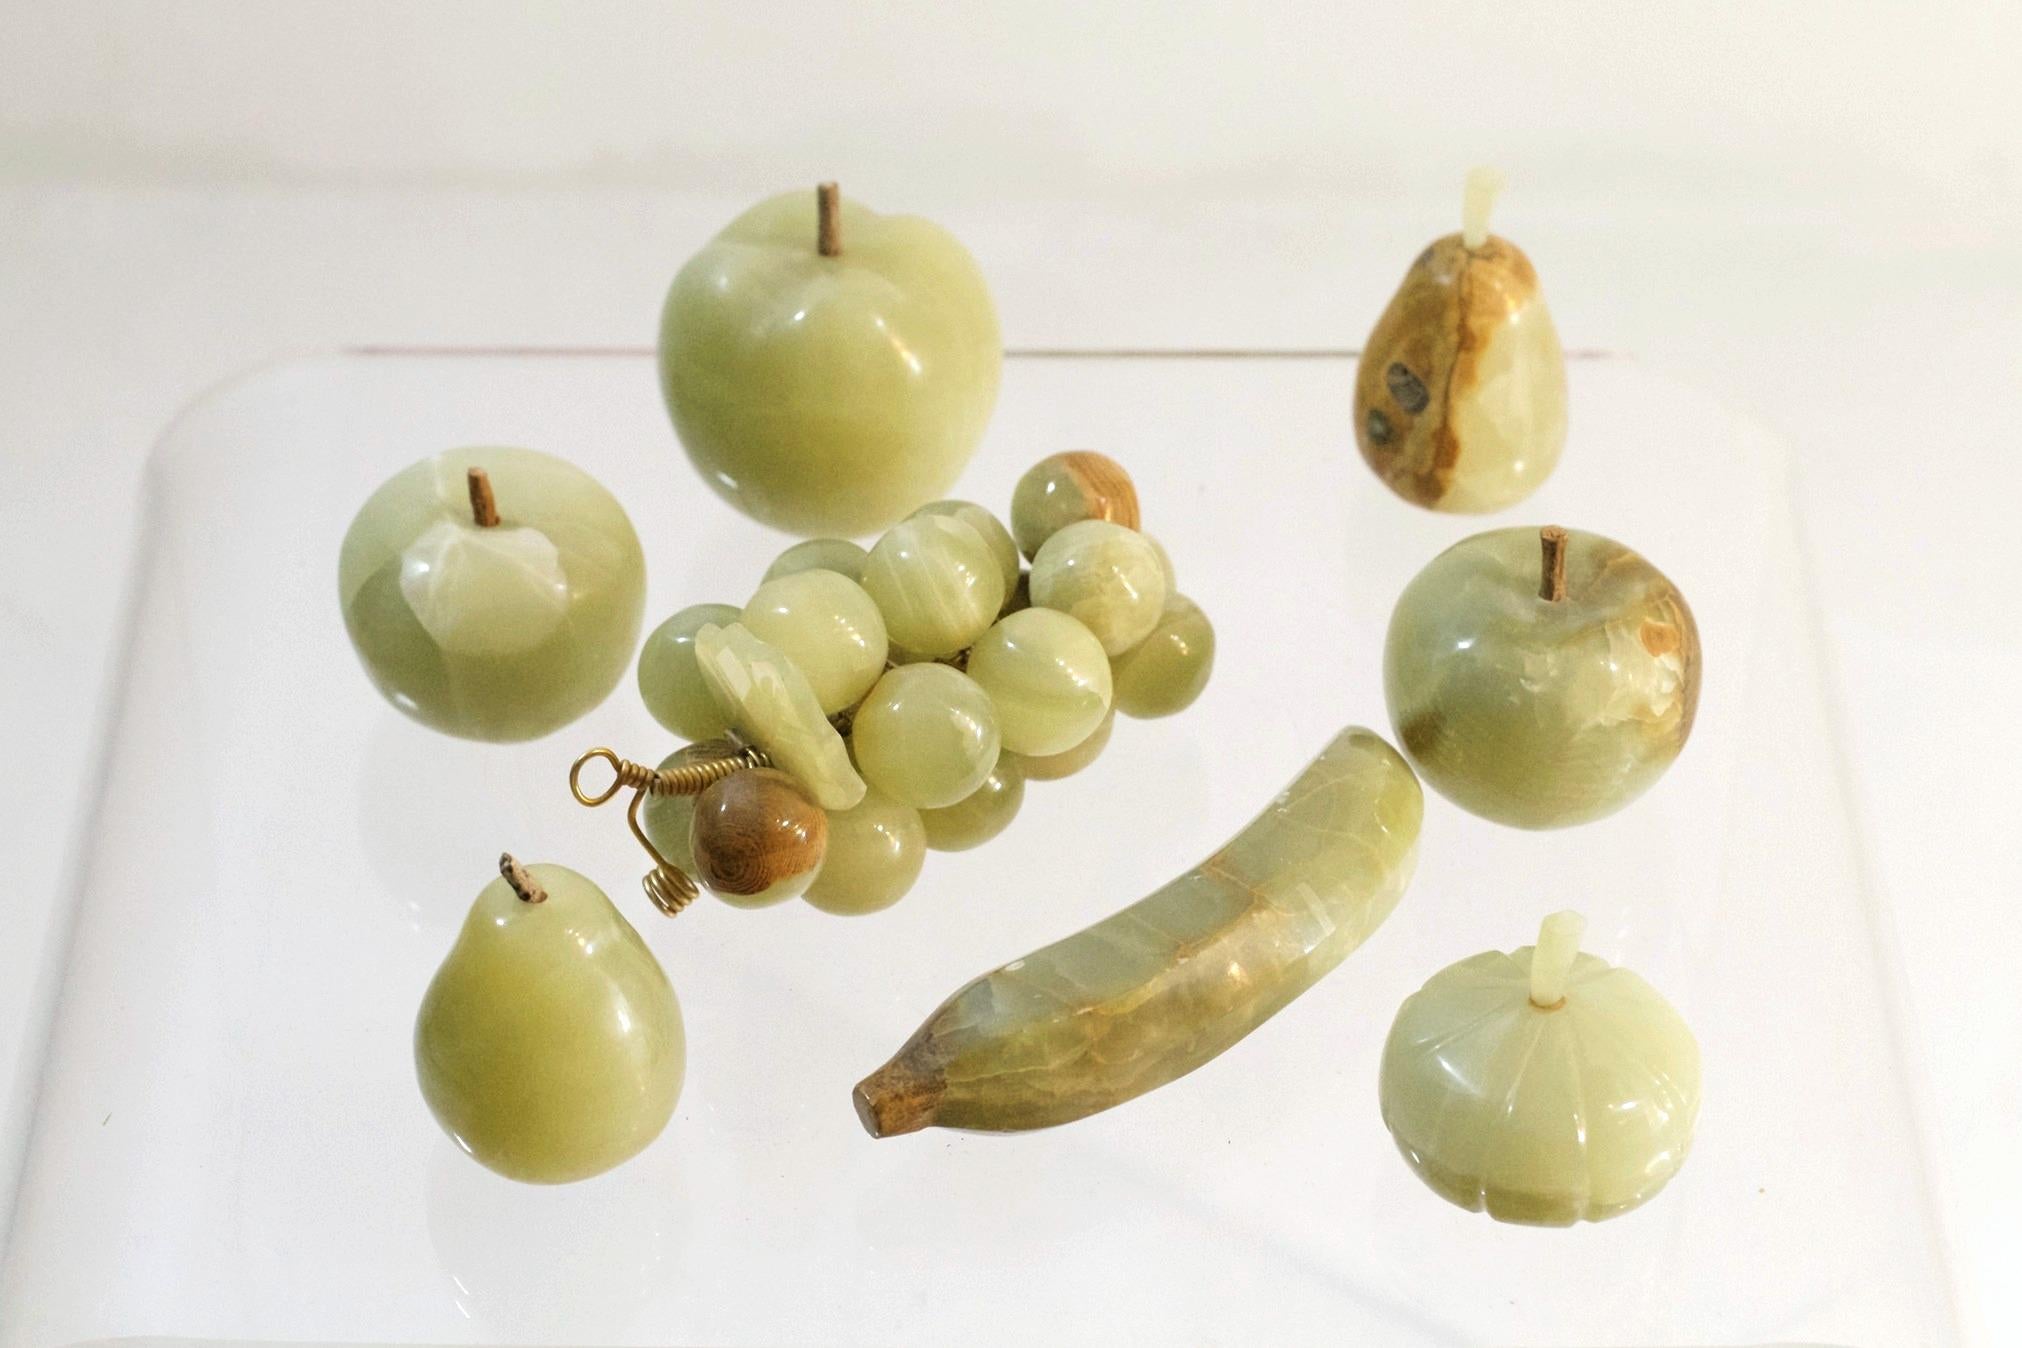 Hand-Crafted Vintage Handmade Onyx Fruit Tray